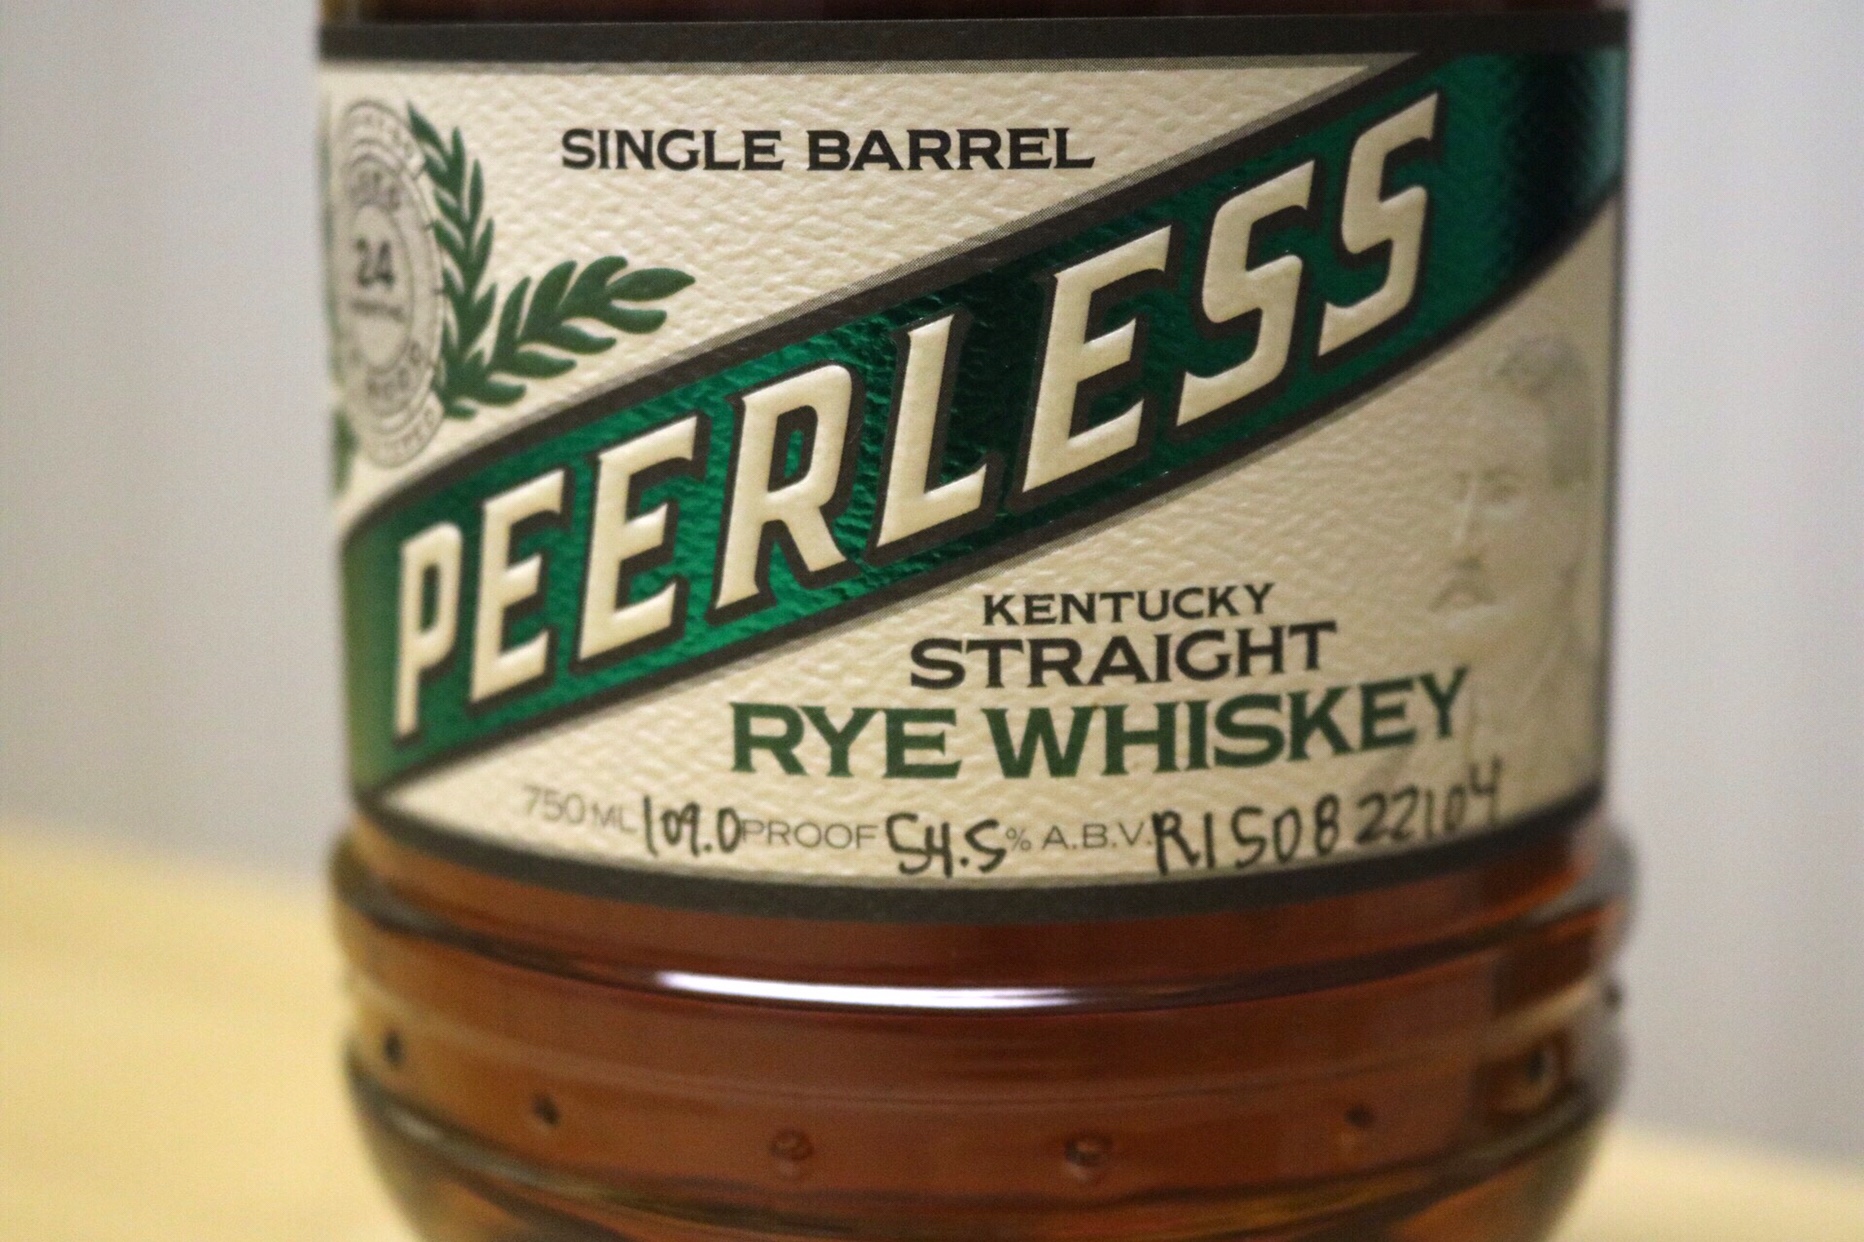 You are currently viewing Peerless Straight Rye Whiskey Single Barrel Select Review